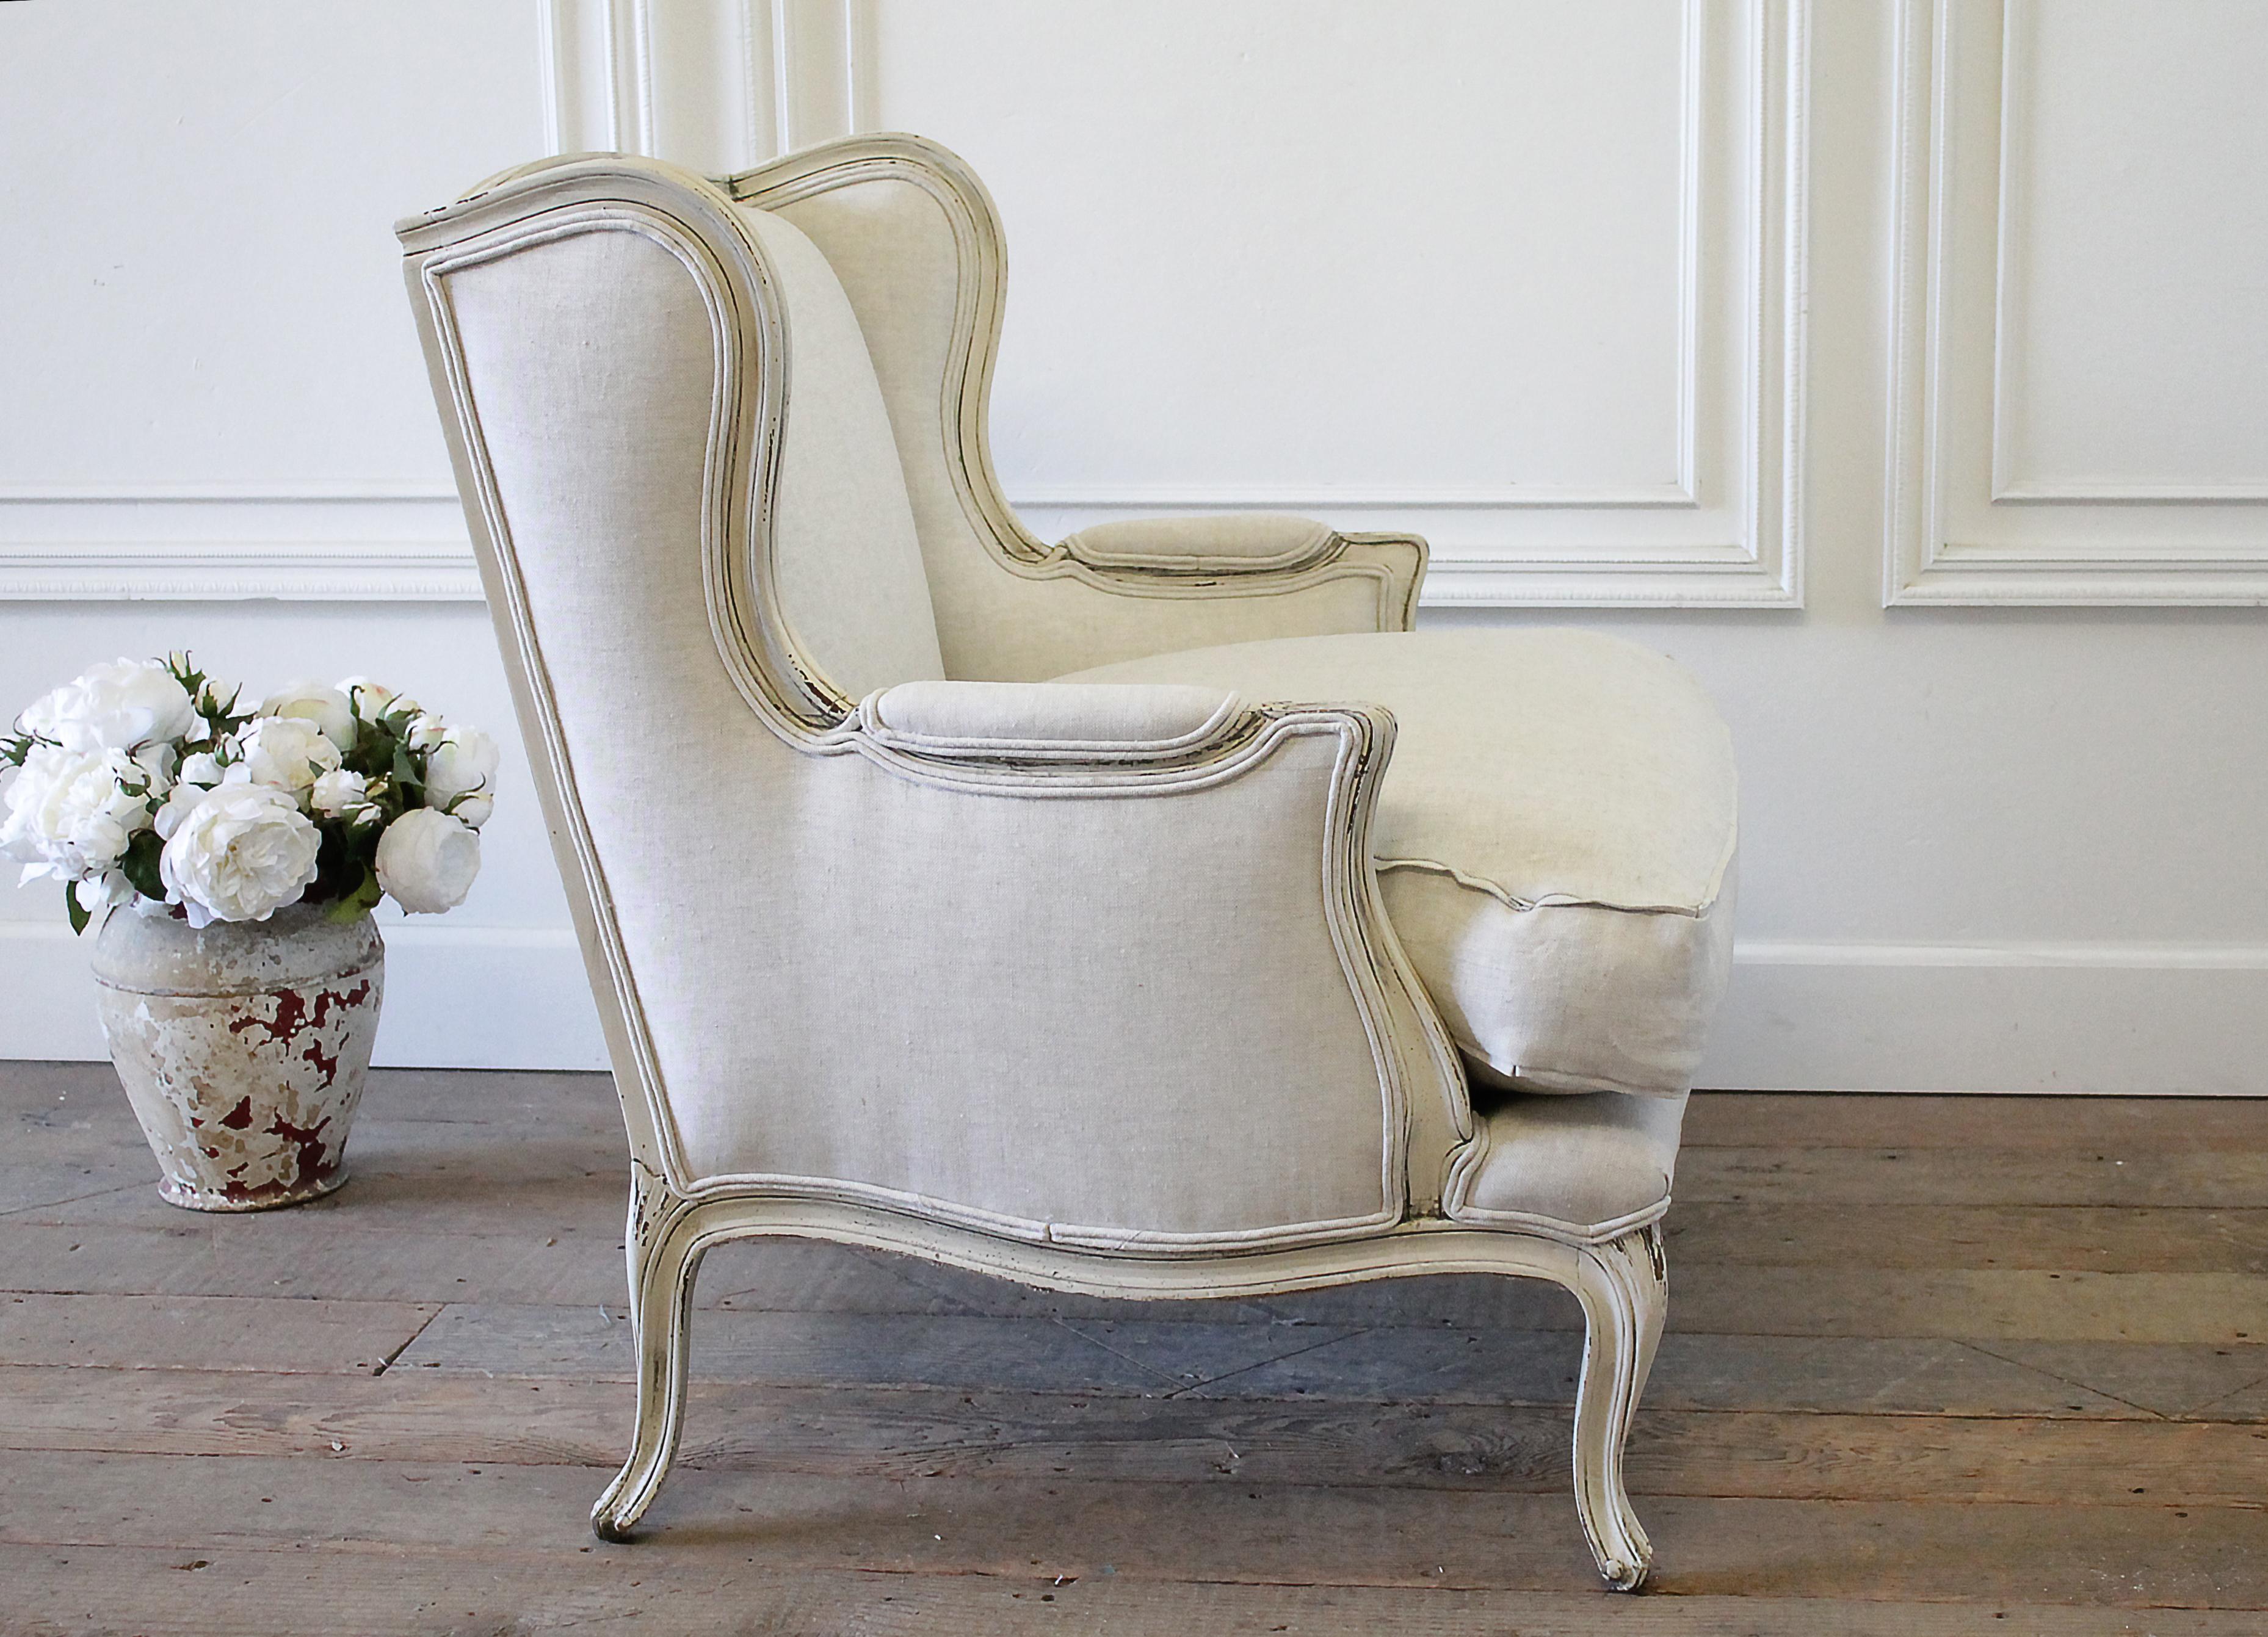 Vintage French Provincial Wing Back Style Chair Upholstered in Natural Linen 3